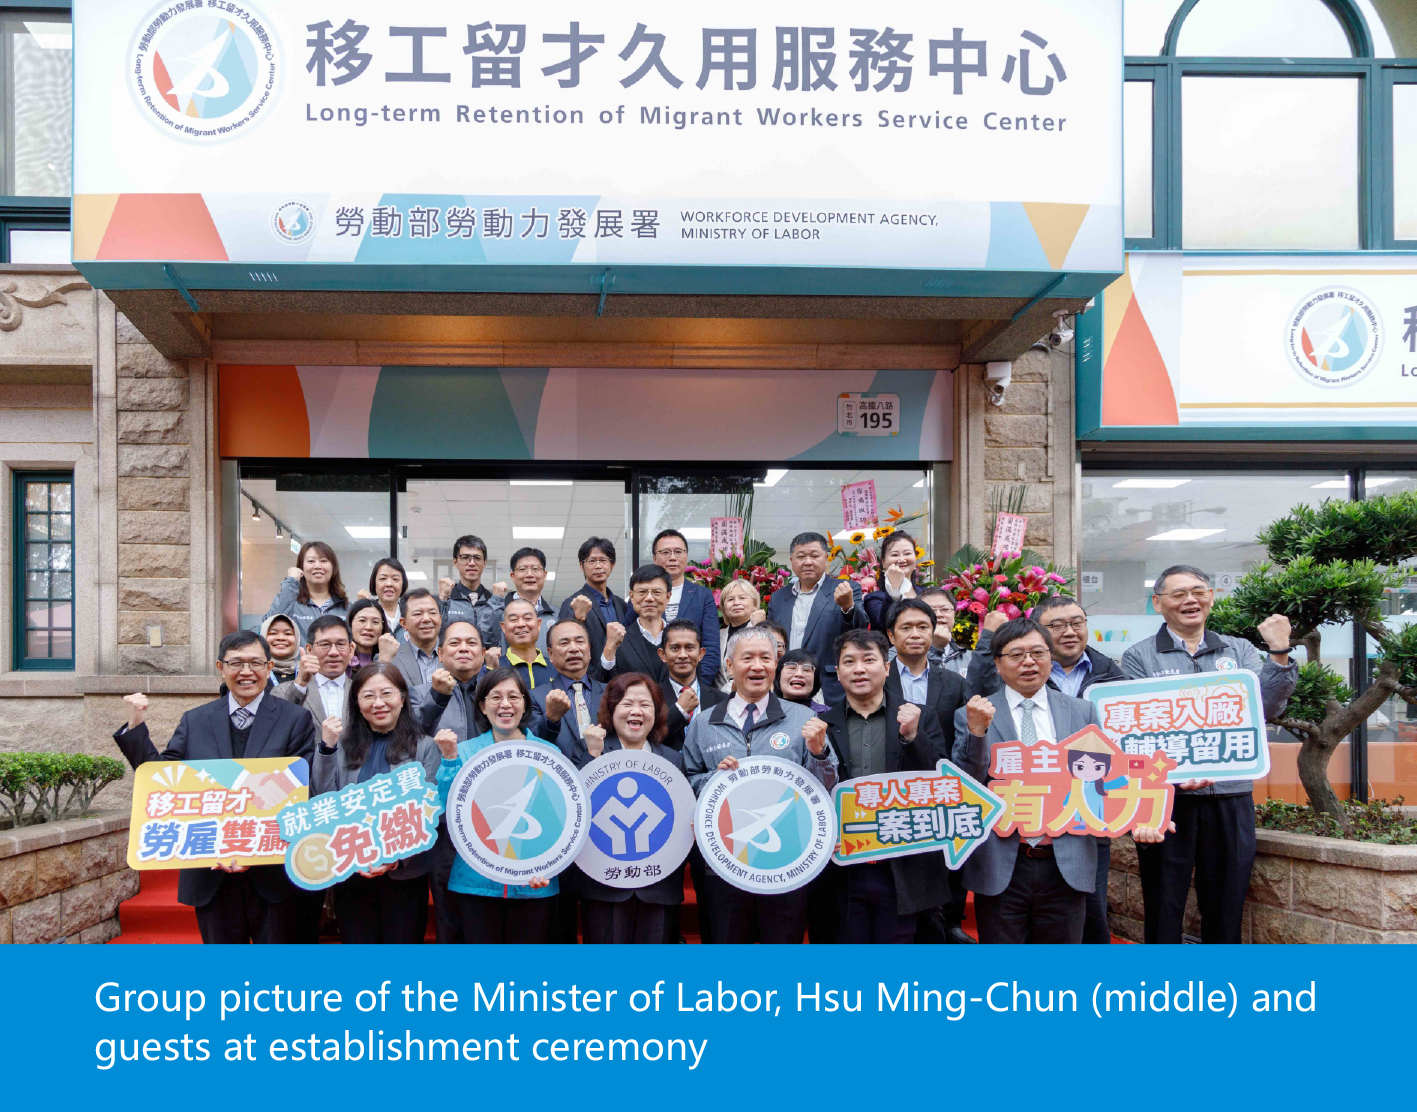 The Ministry of Labor Officially Established "the Long-Term Retention of Migrant Workers Service Center" on December 6, 2023